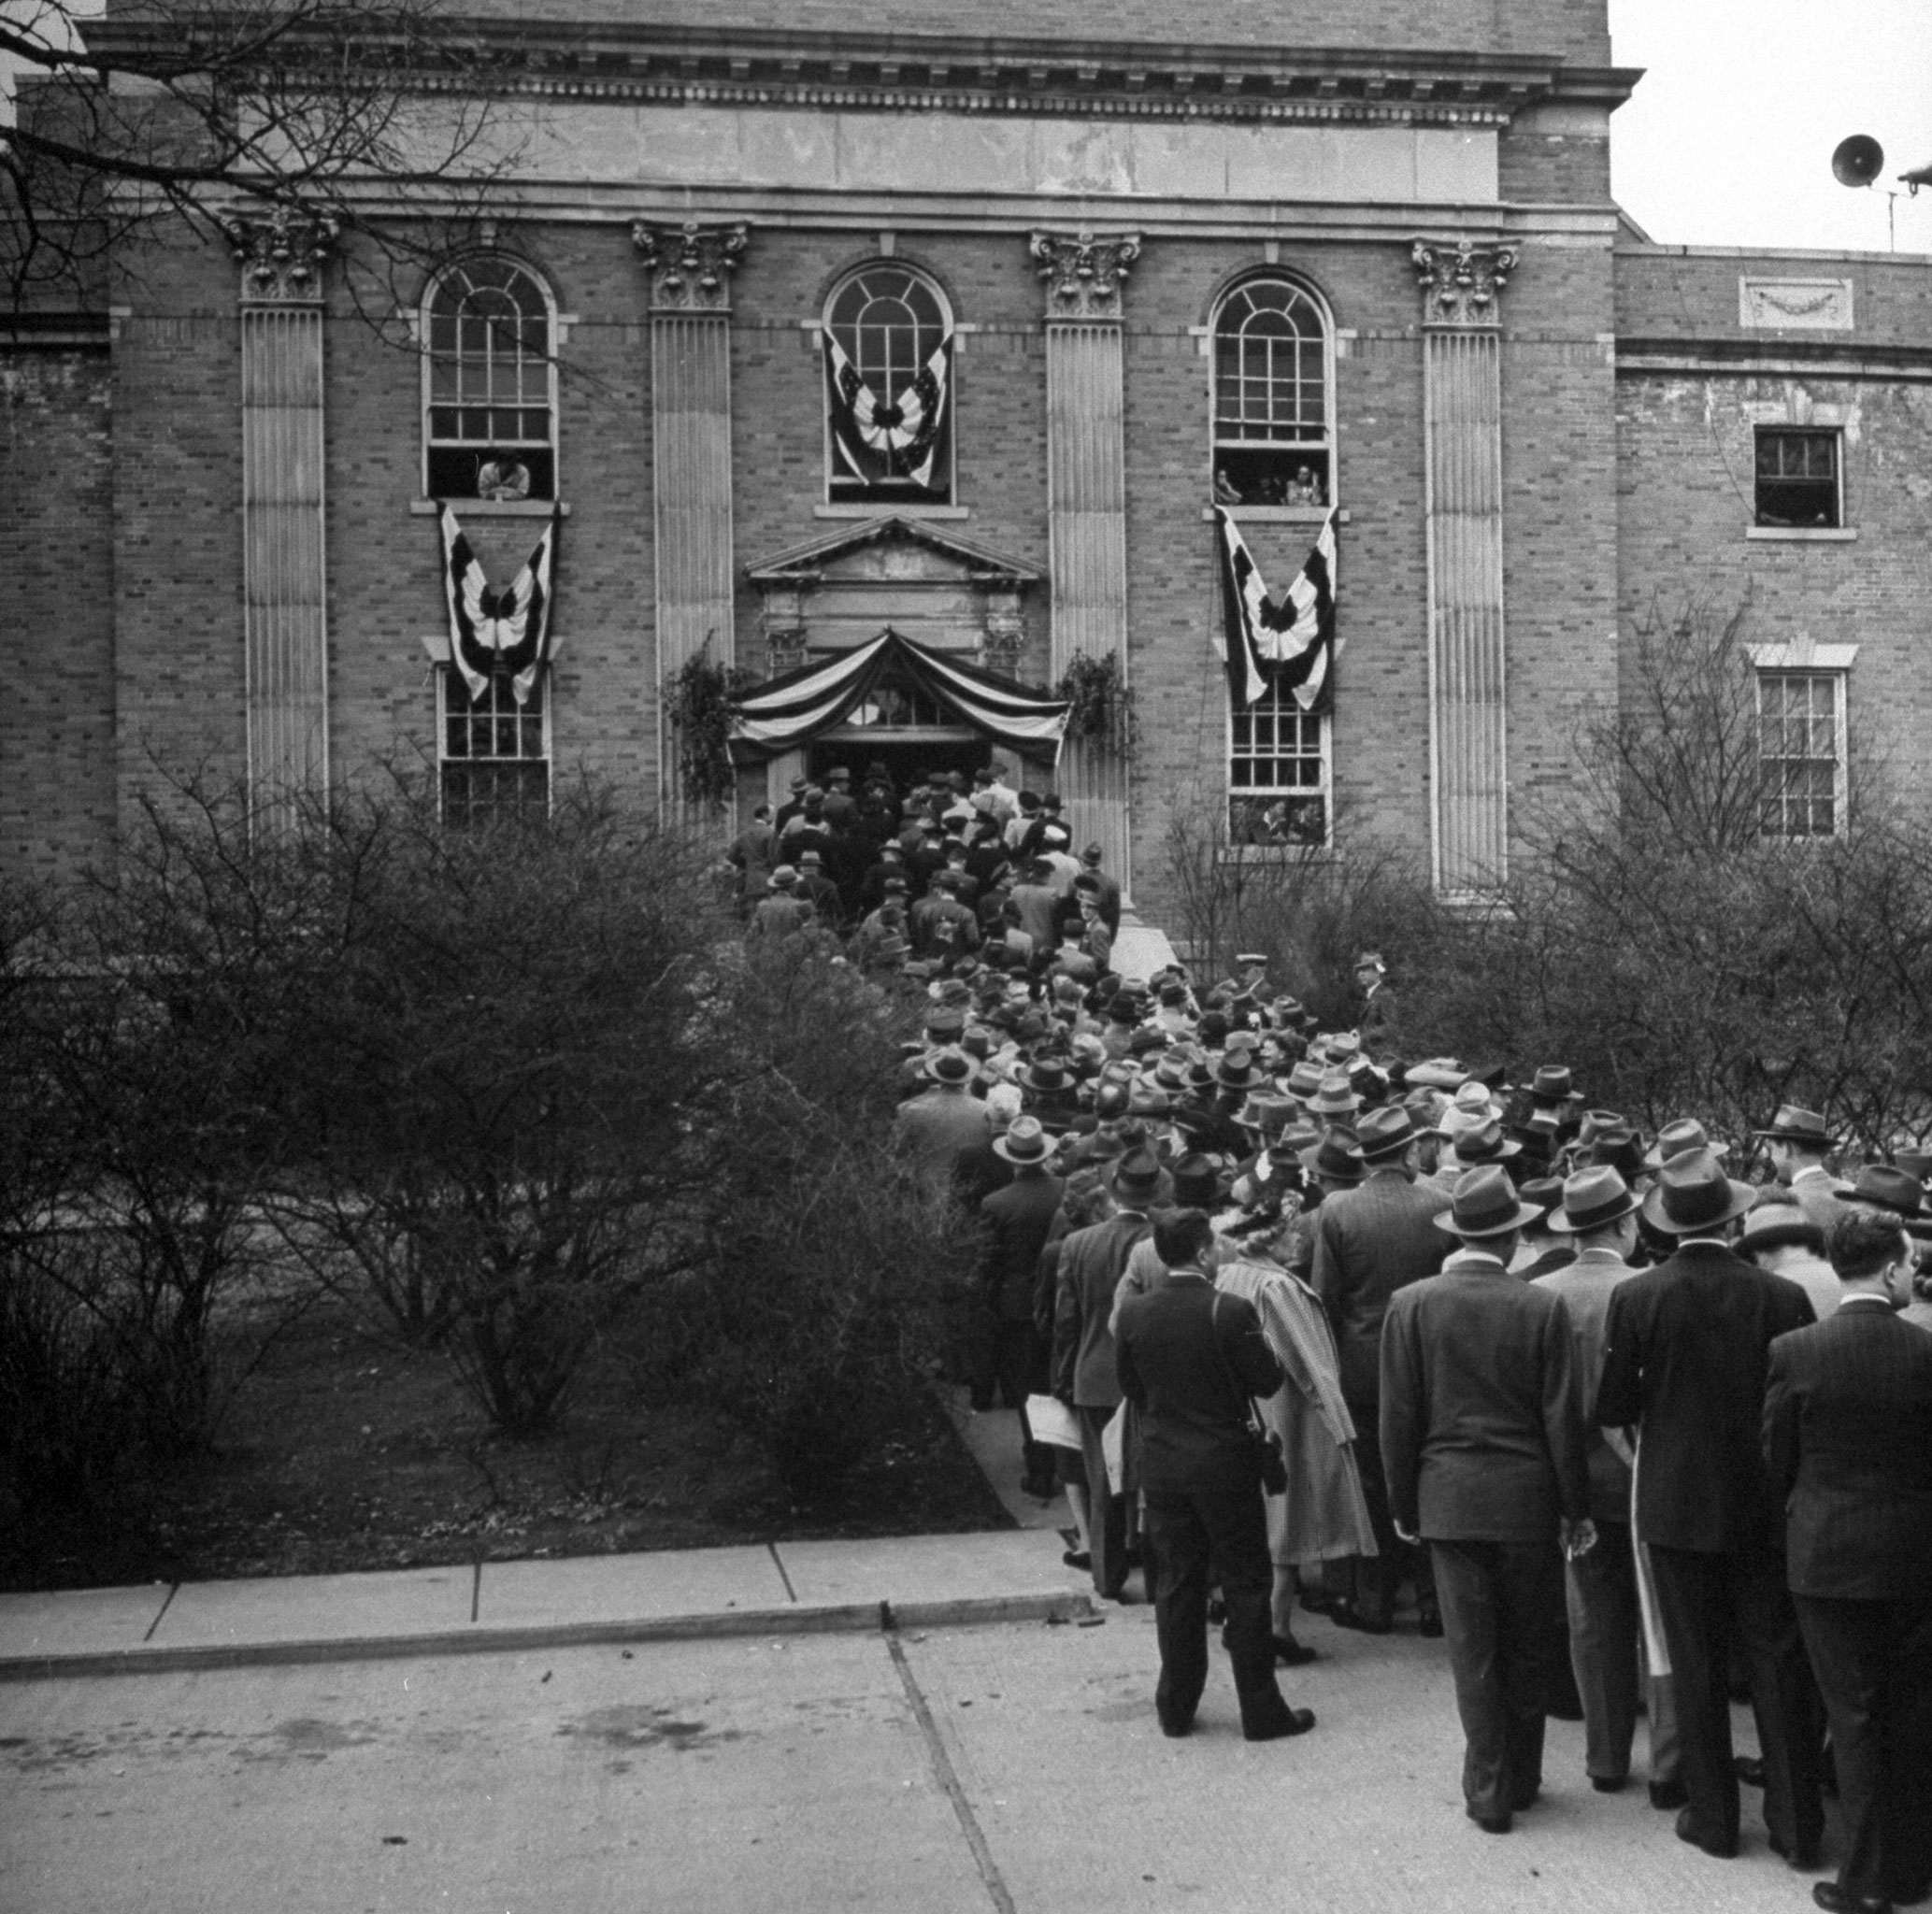 A long line of people waiting to enter the building where Sir Winston Churchill is making his speech, Missouri, 1946.